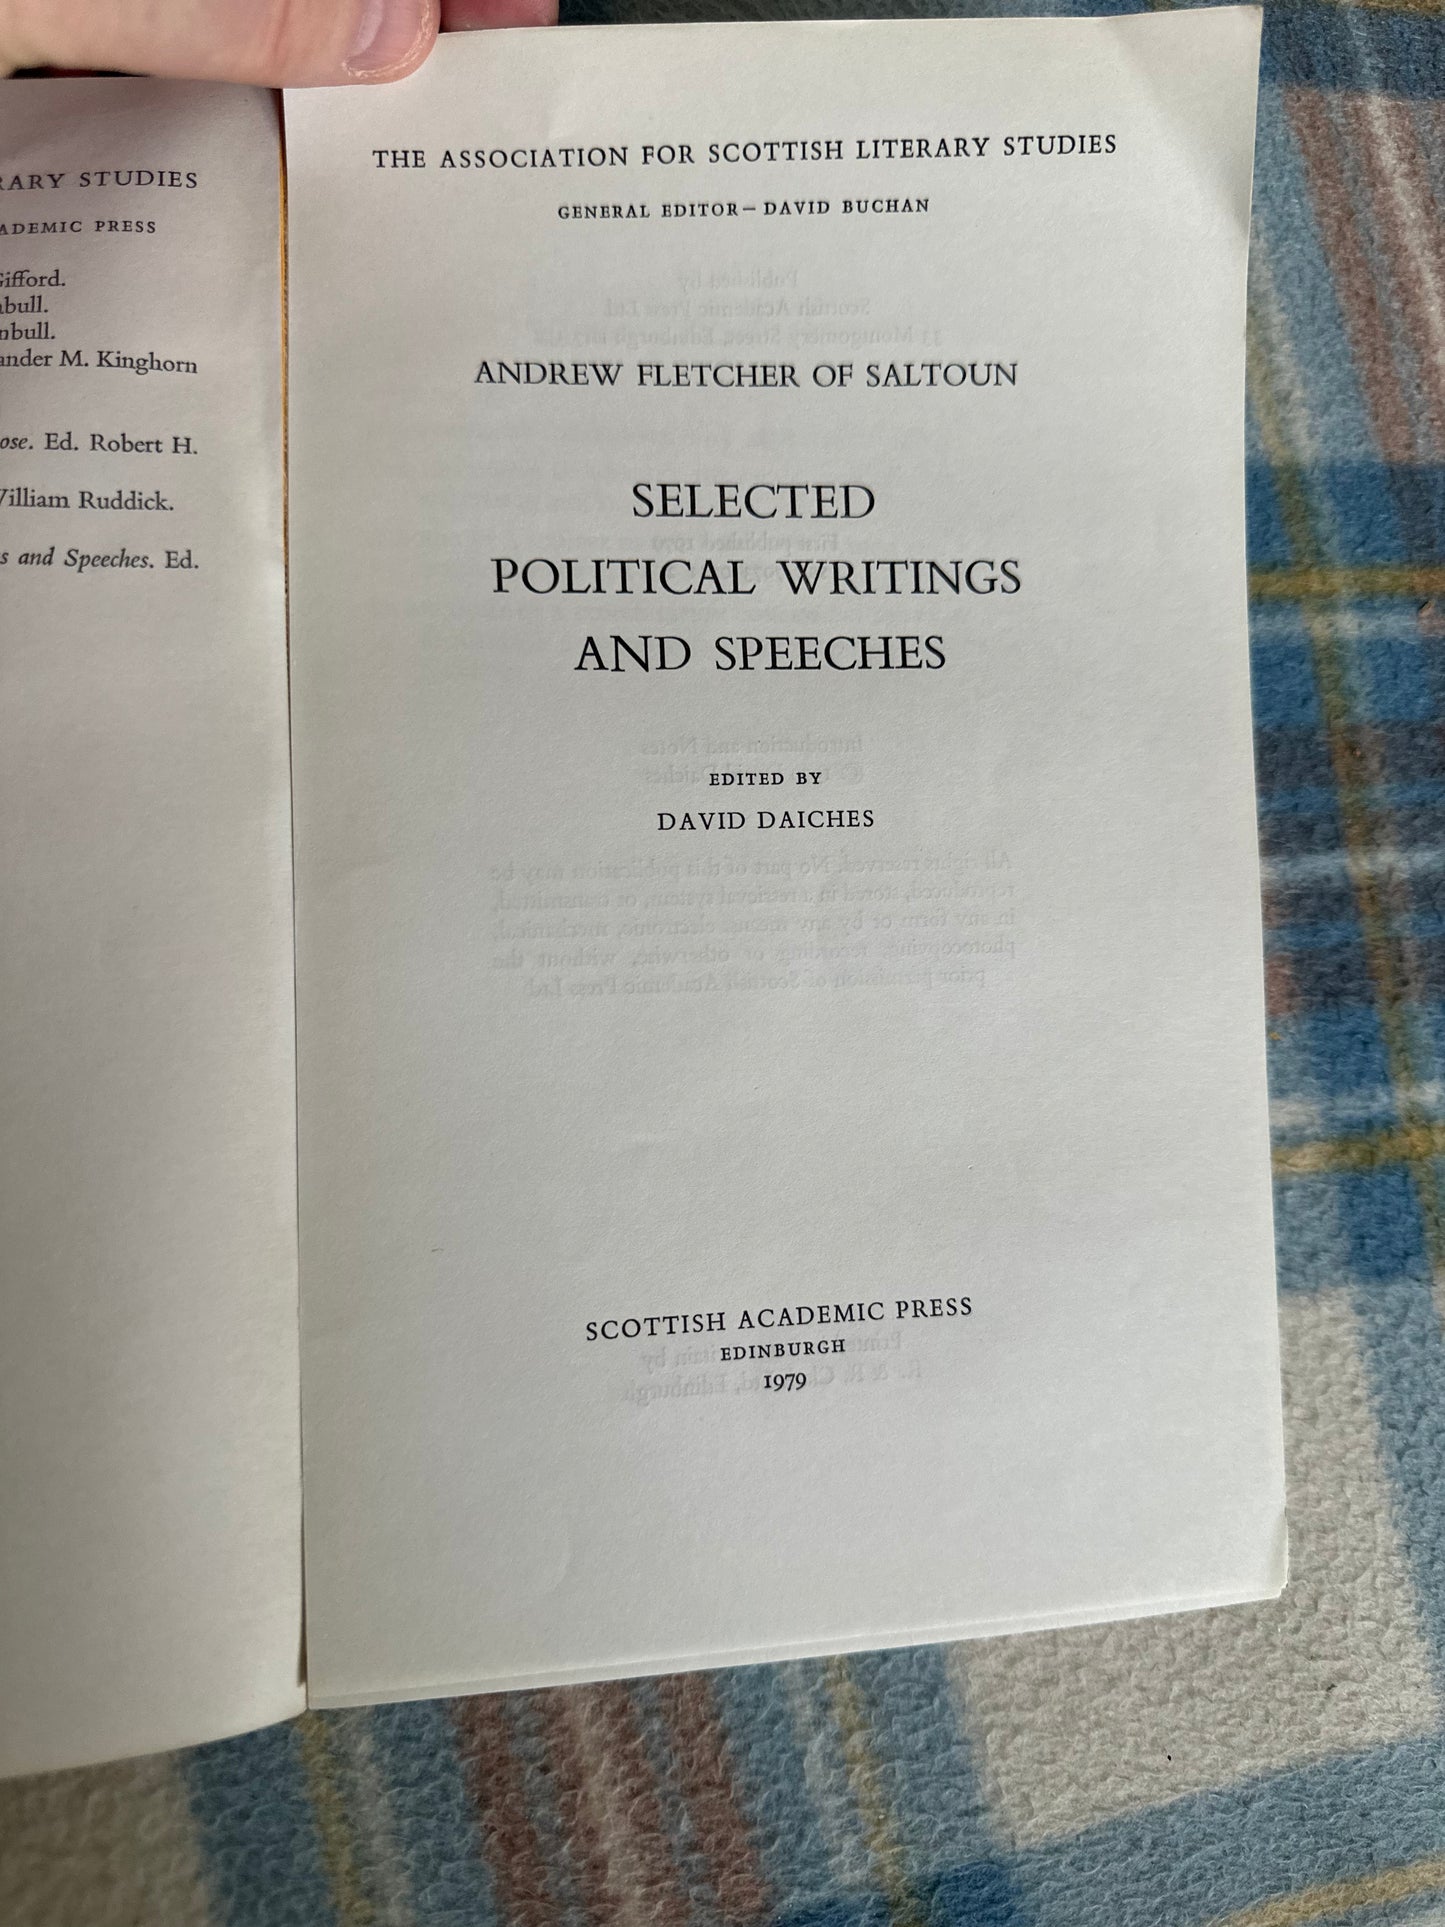 1979*Uncorrected Proof Copy* Andrew Fletcher Of Saltoun Selected Political Writings & Speeches - edited David Daiches(Scottish Academic Press)